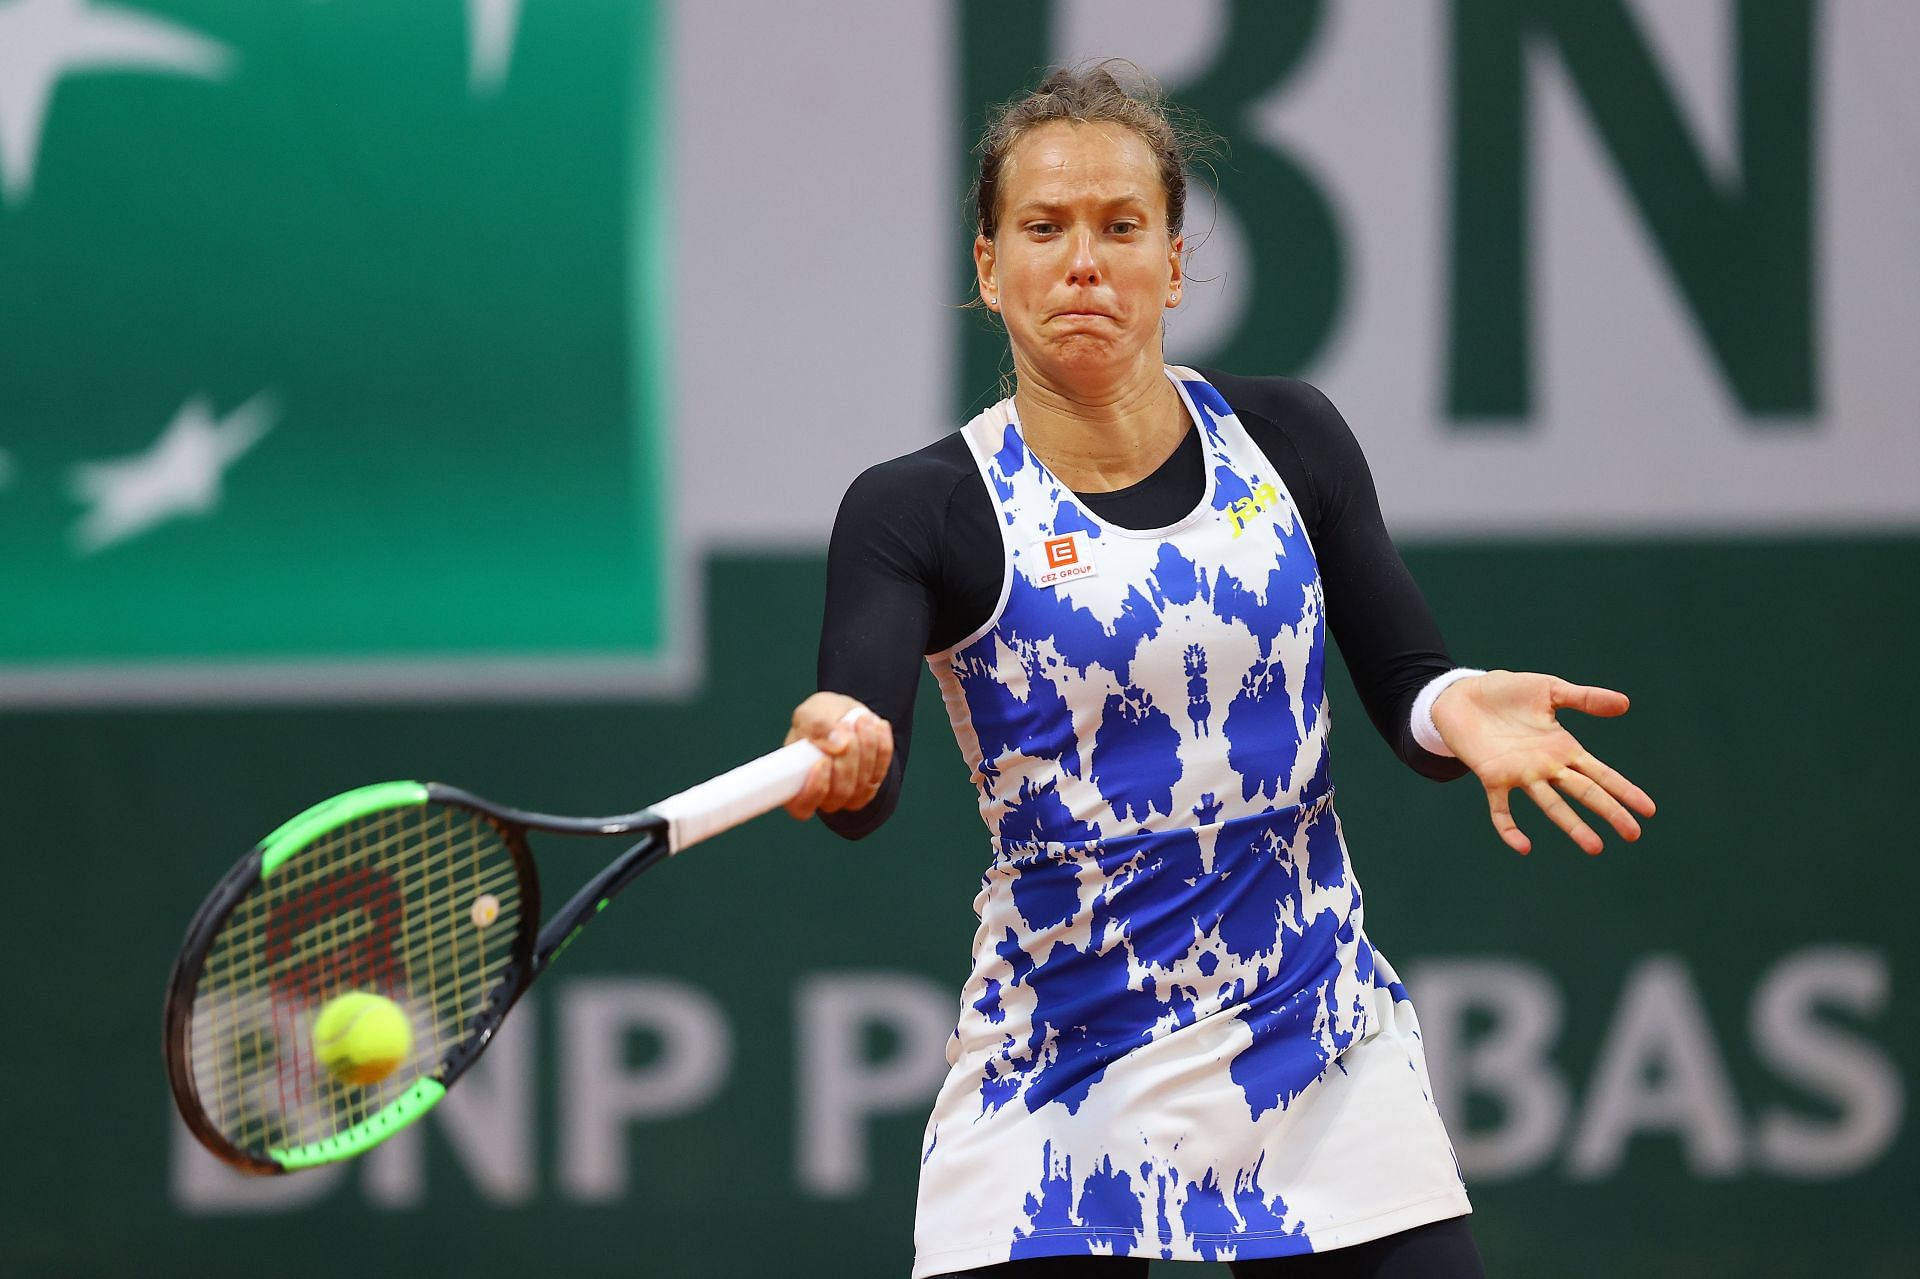 Barbora Strycova at the 2020 French Open.